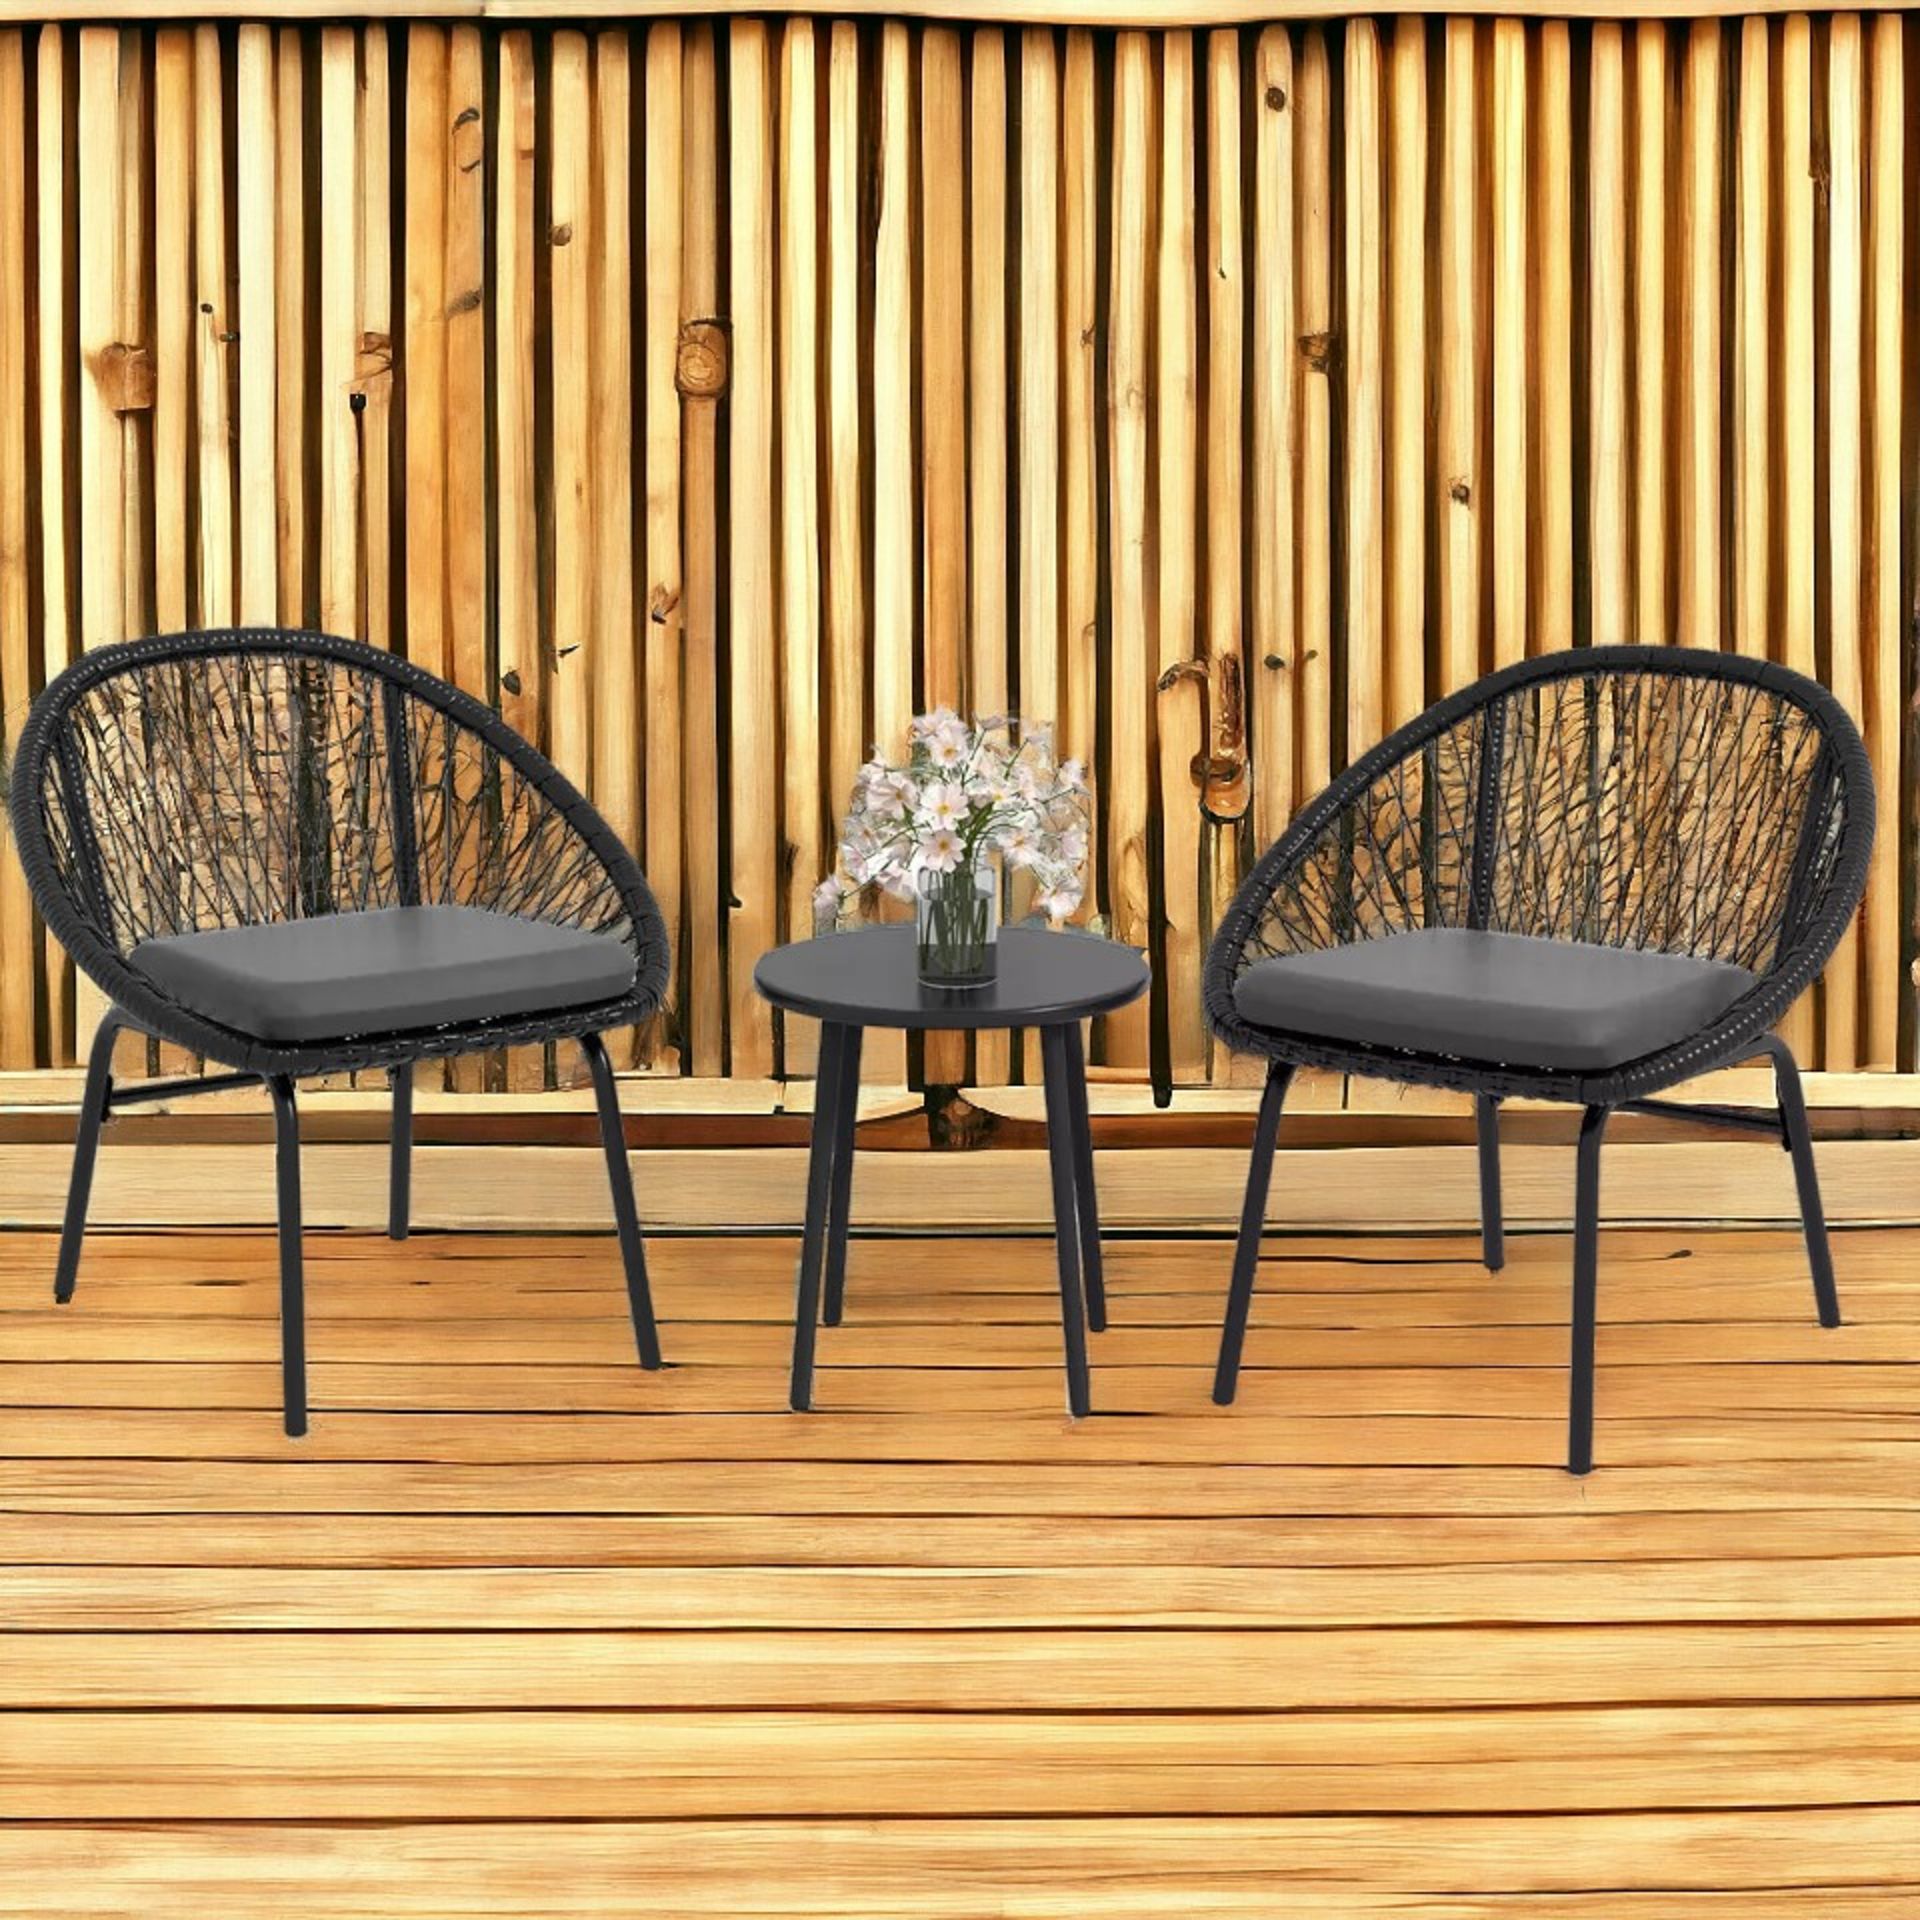 FREE DELIVERY- BRAND NEW 3 PIECE GARDEN FURNITURE SET, BISTRO SET W/ 2 CHAIRS & 1 COFFEE TABLE - Image 2 of 2